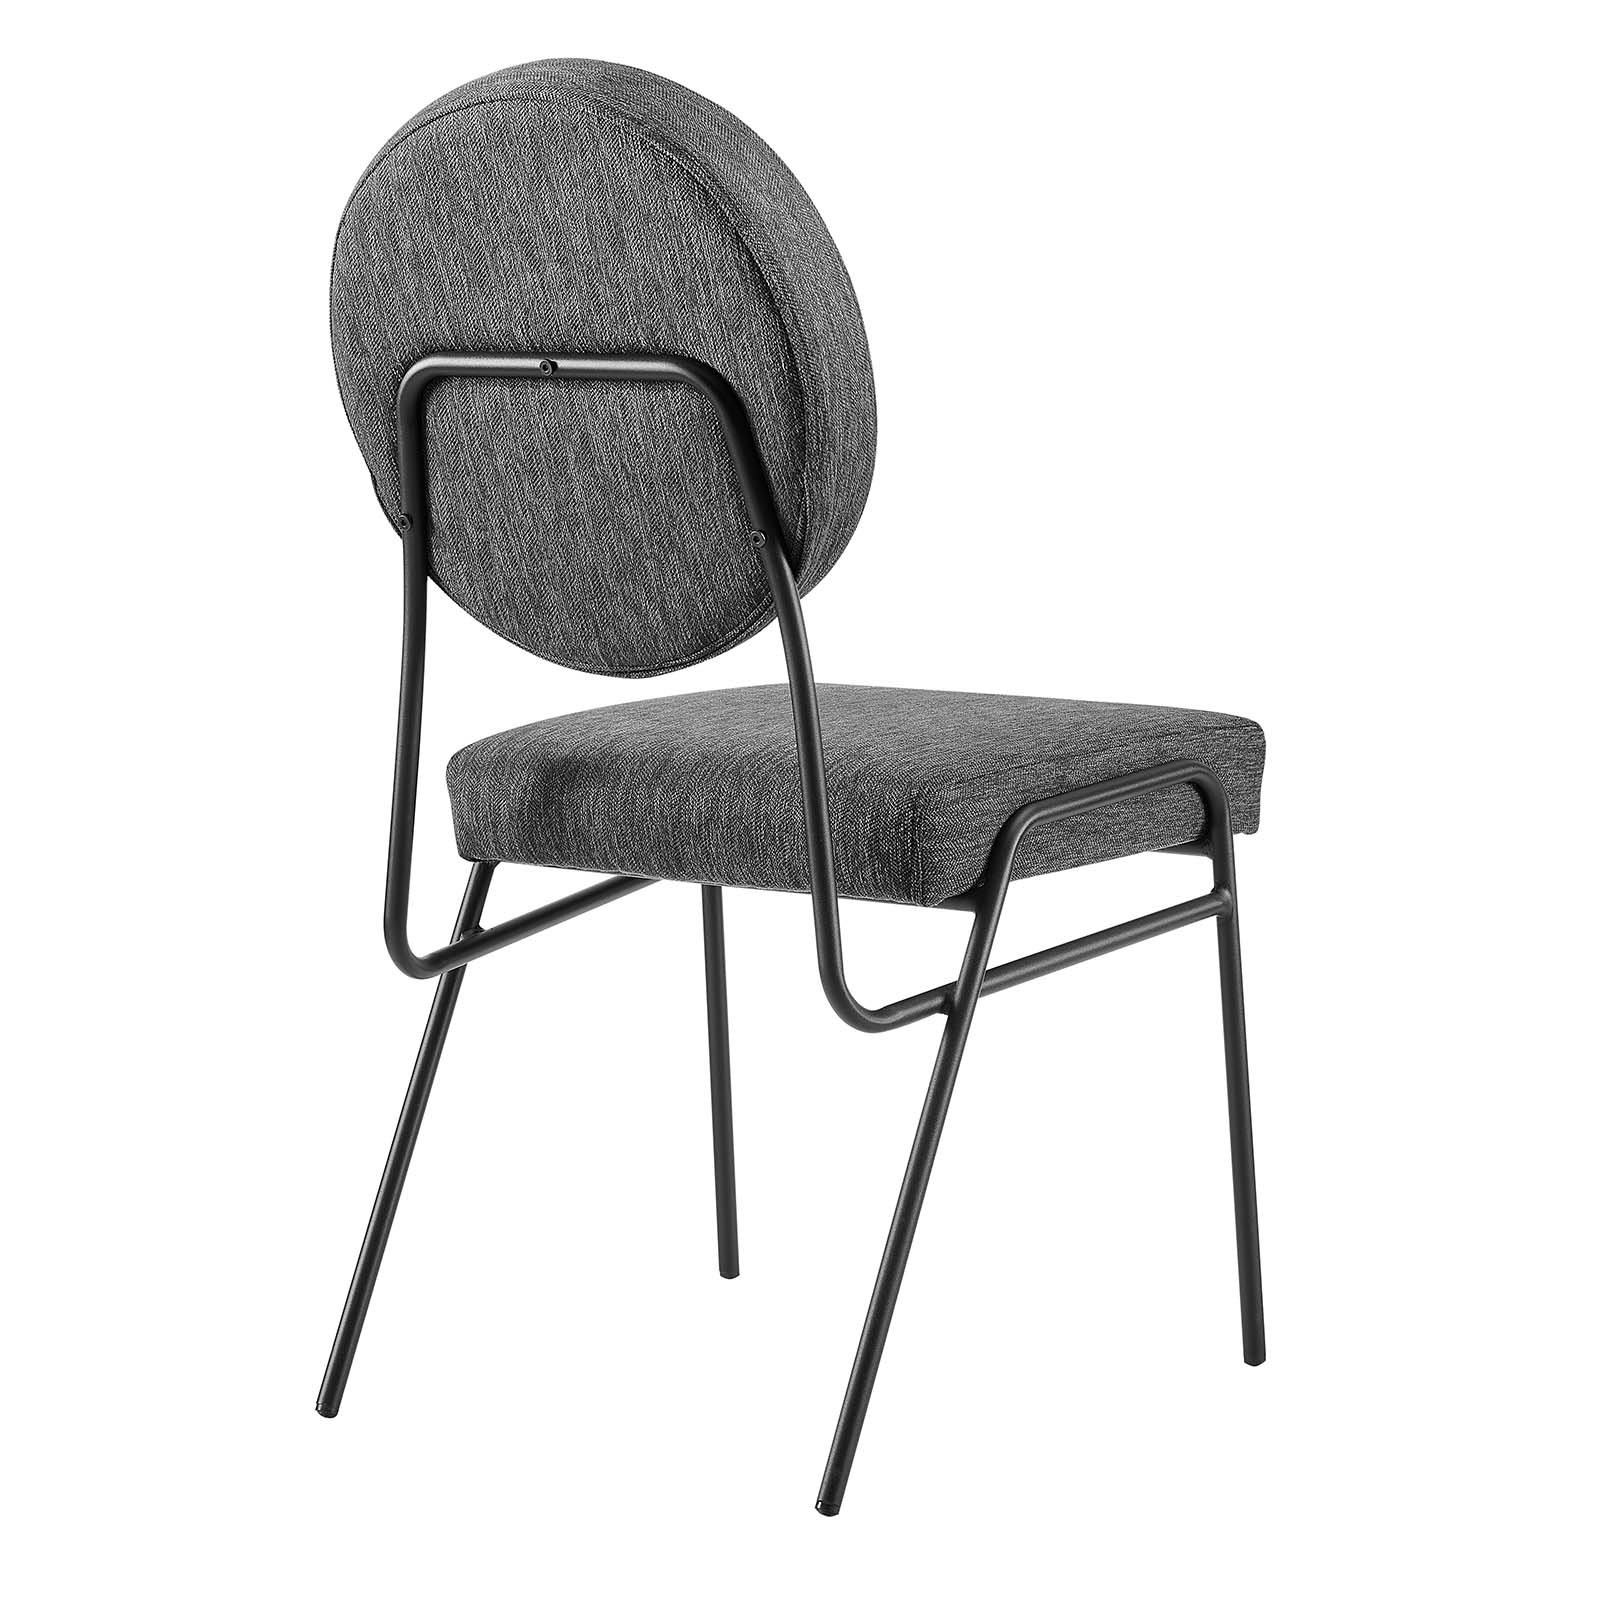 Craft Upholstered Fabric Dining Side Chairs, Black Charcoal